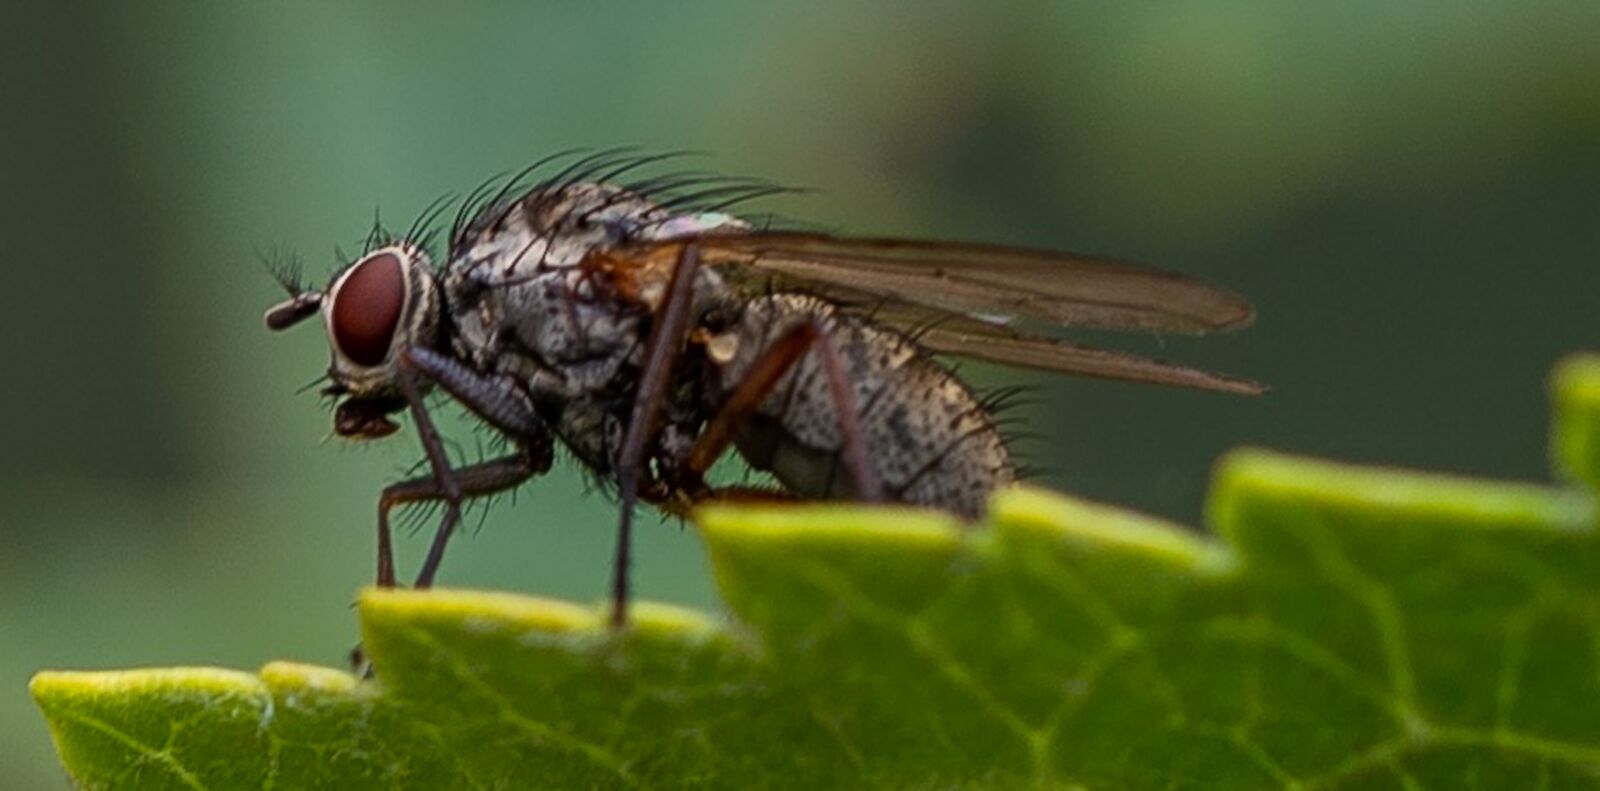 Sony a7 III sample photo. Fly, macro, insect photography